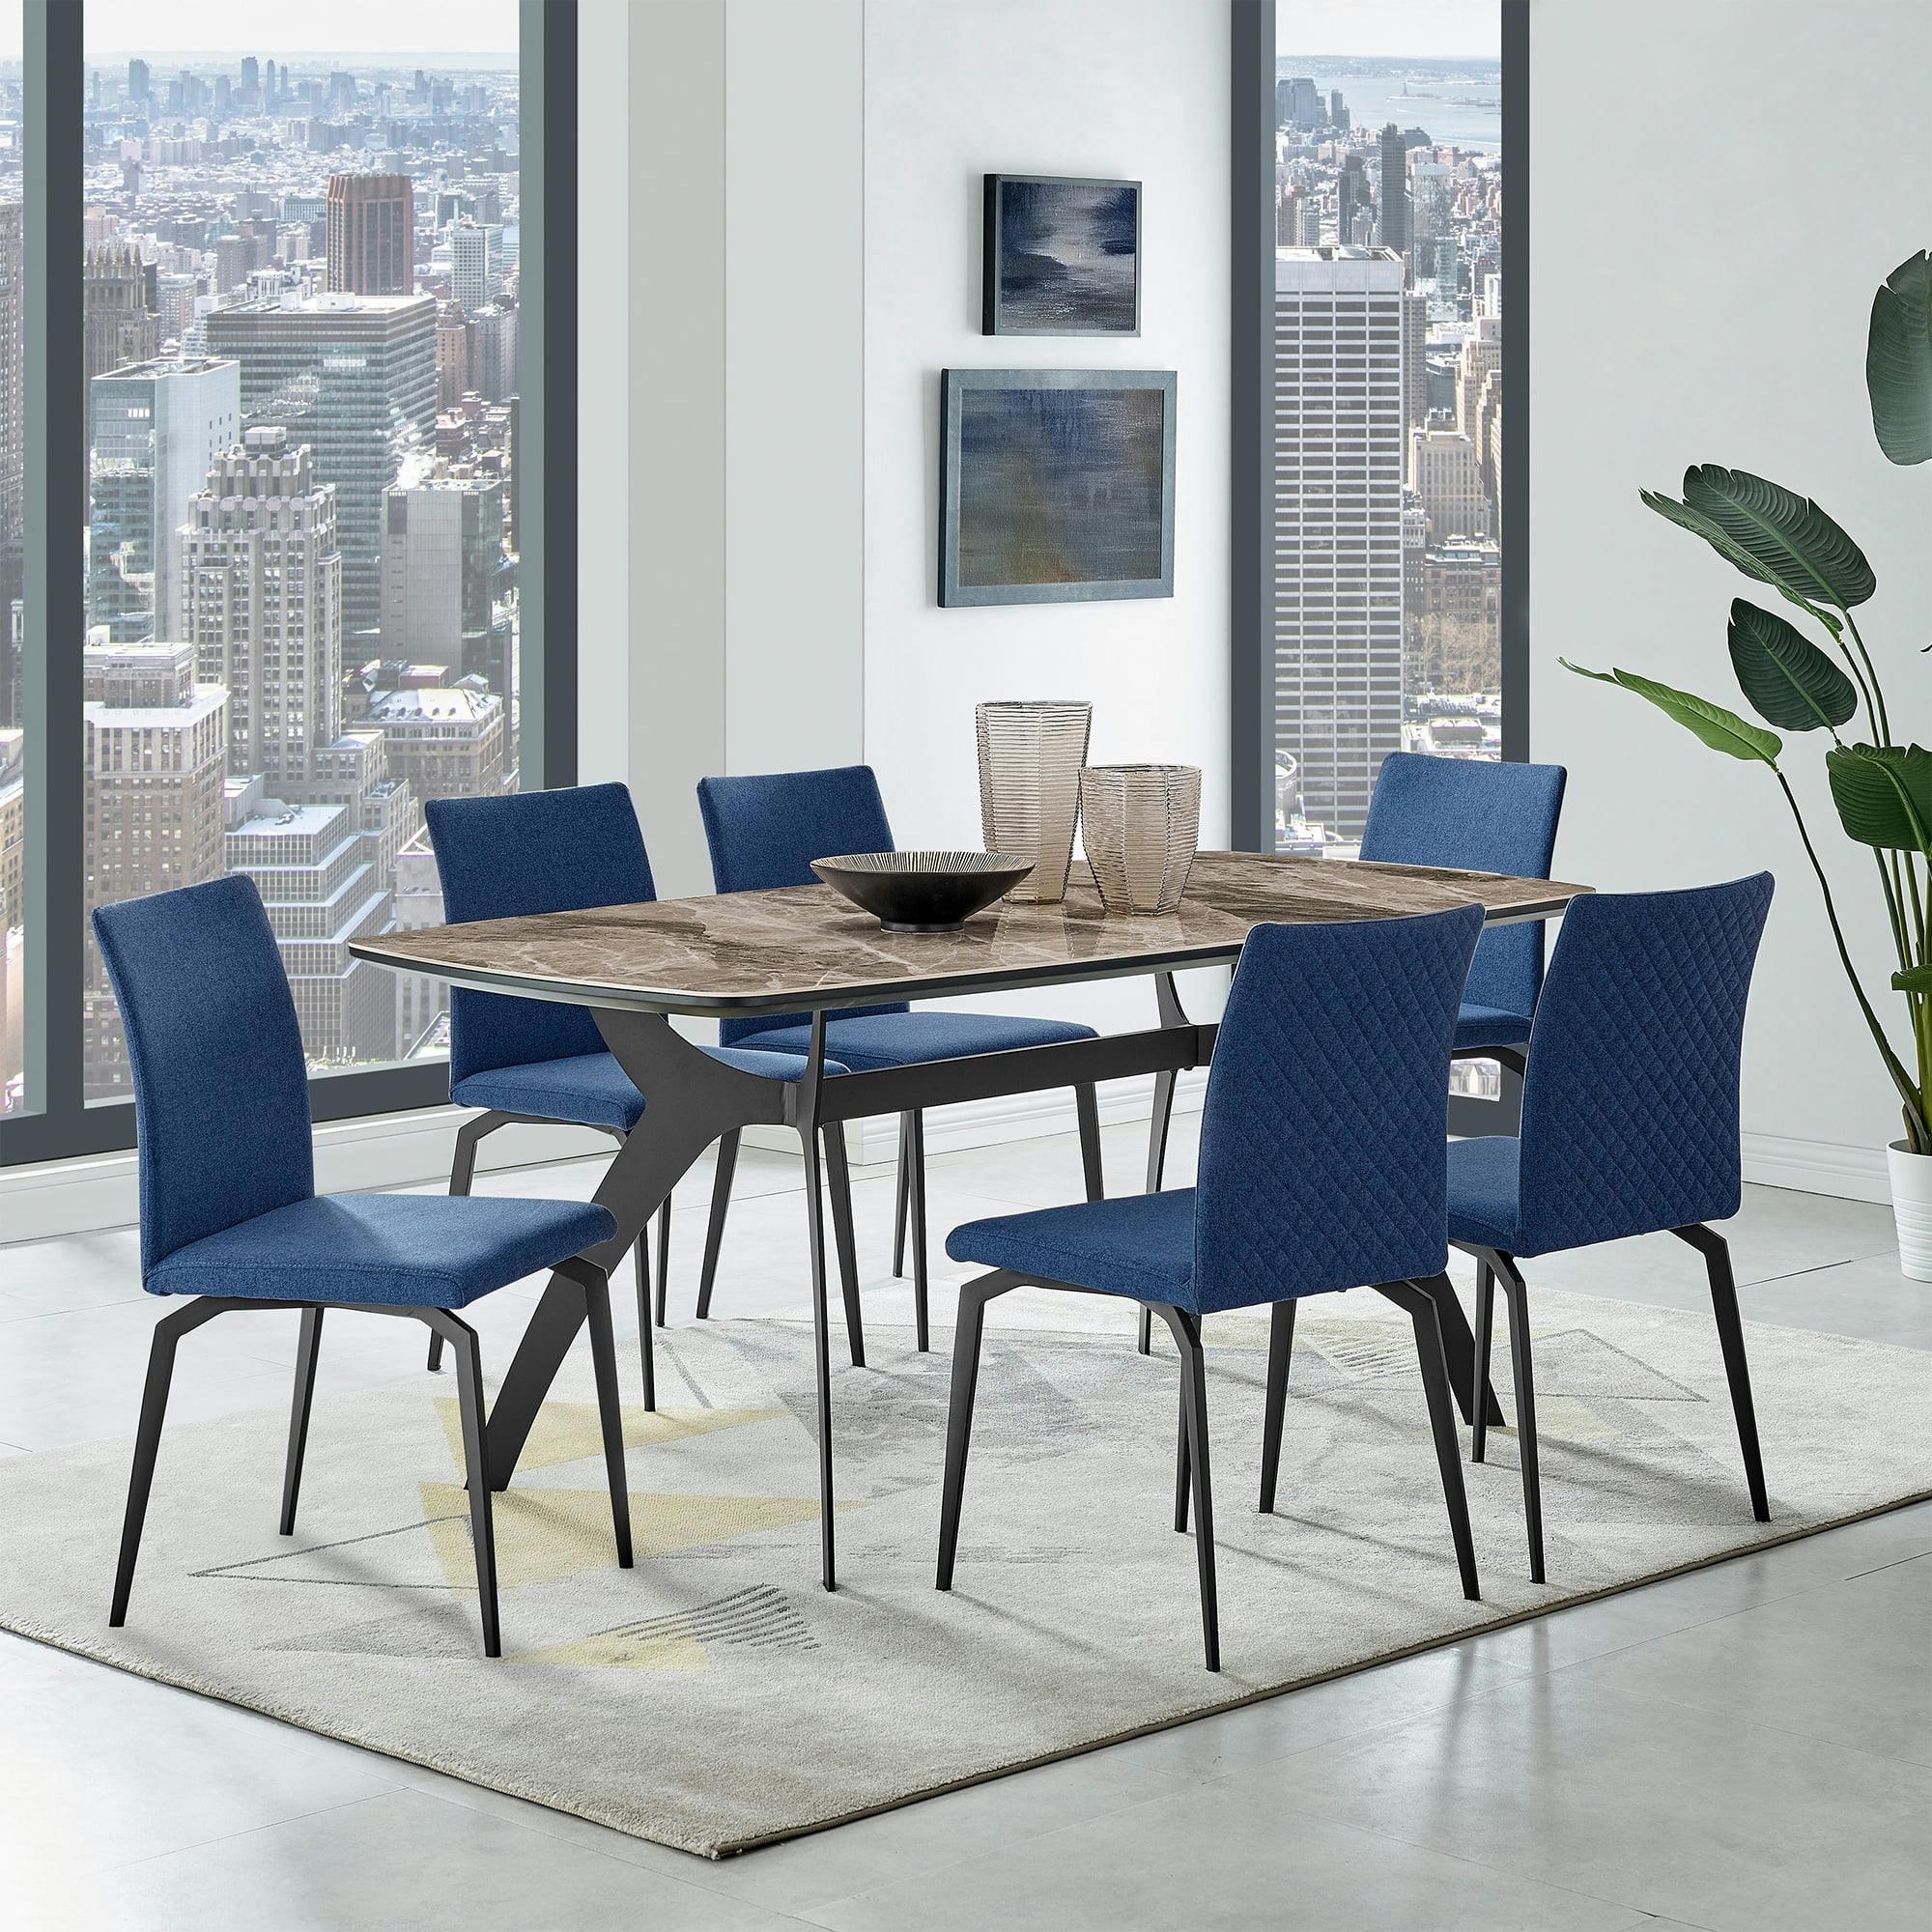 Sophisticated Andes & Lyon 7-Piece Dining Set with Blue Fabric Chairs